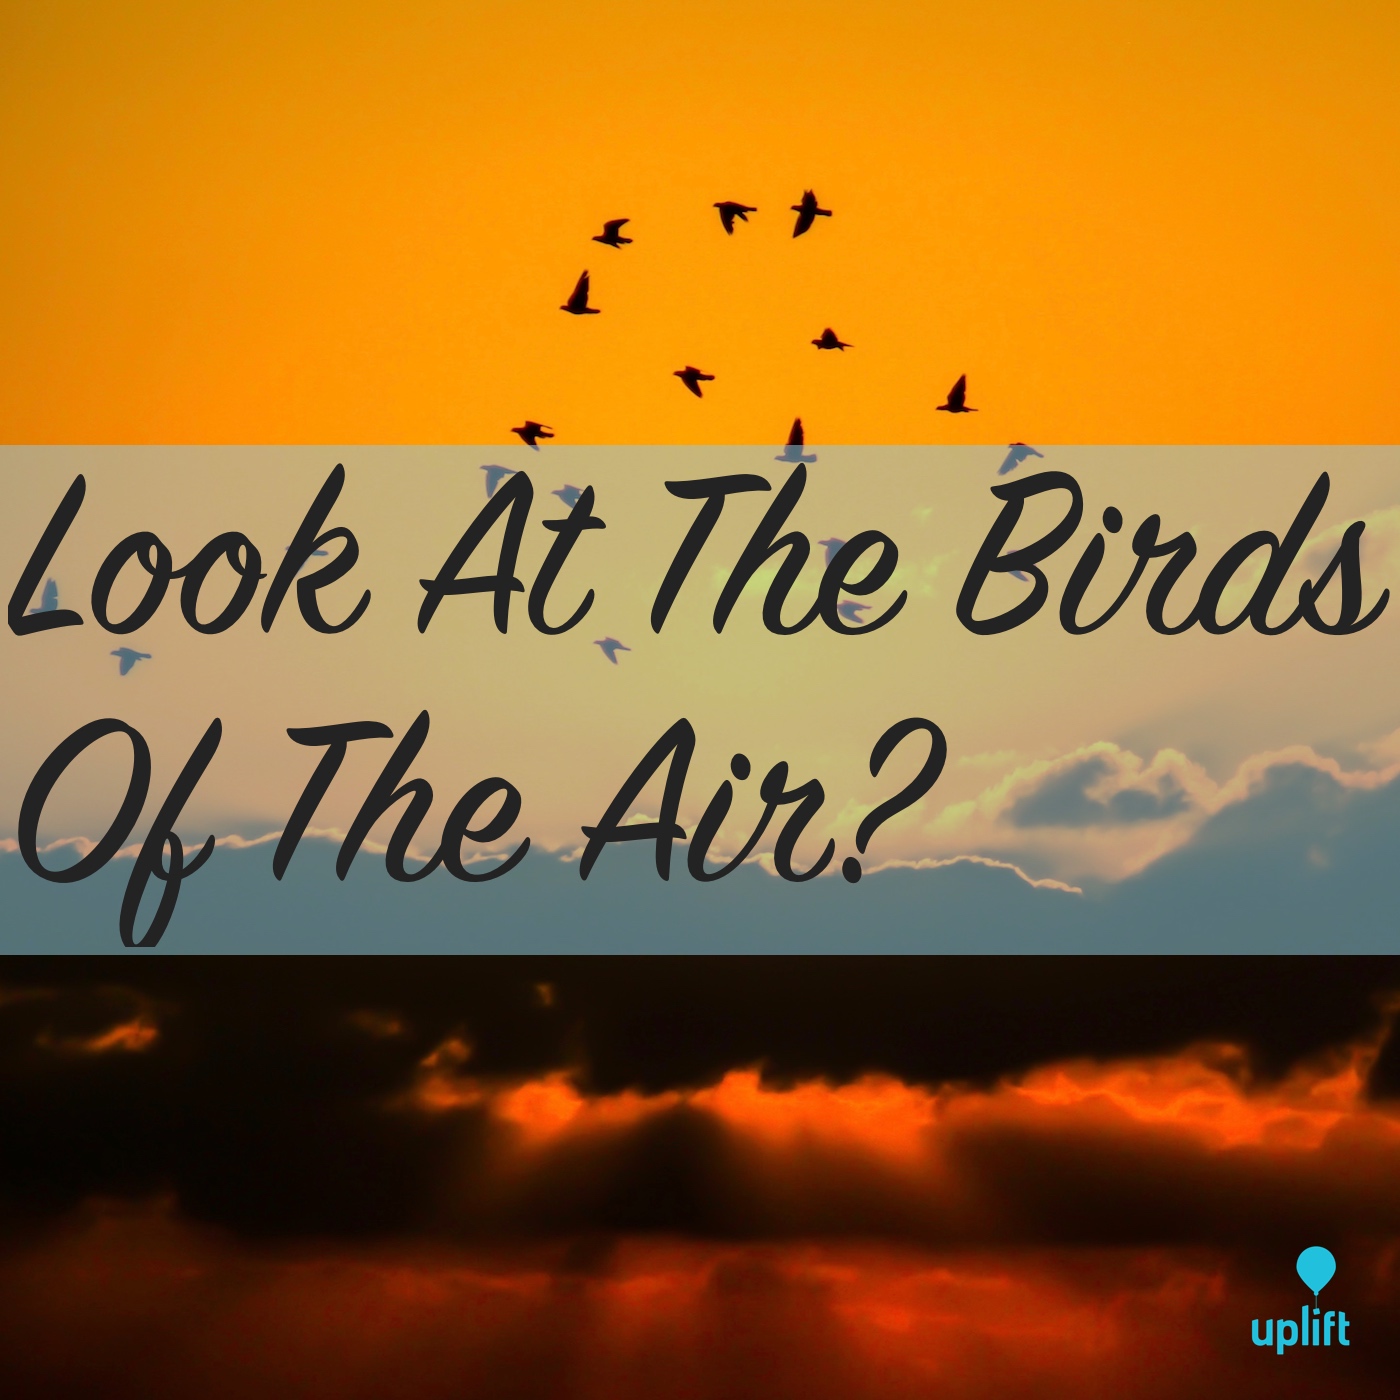 Episode 14: Look At The Birds Of The Air?